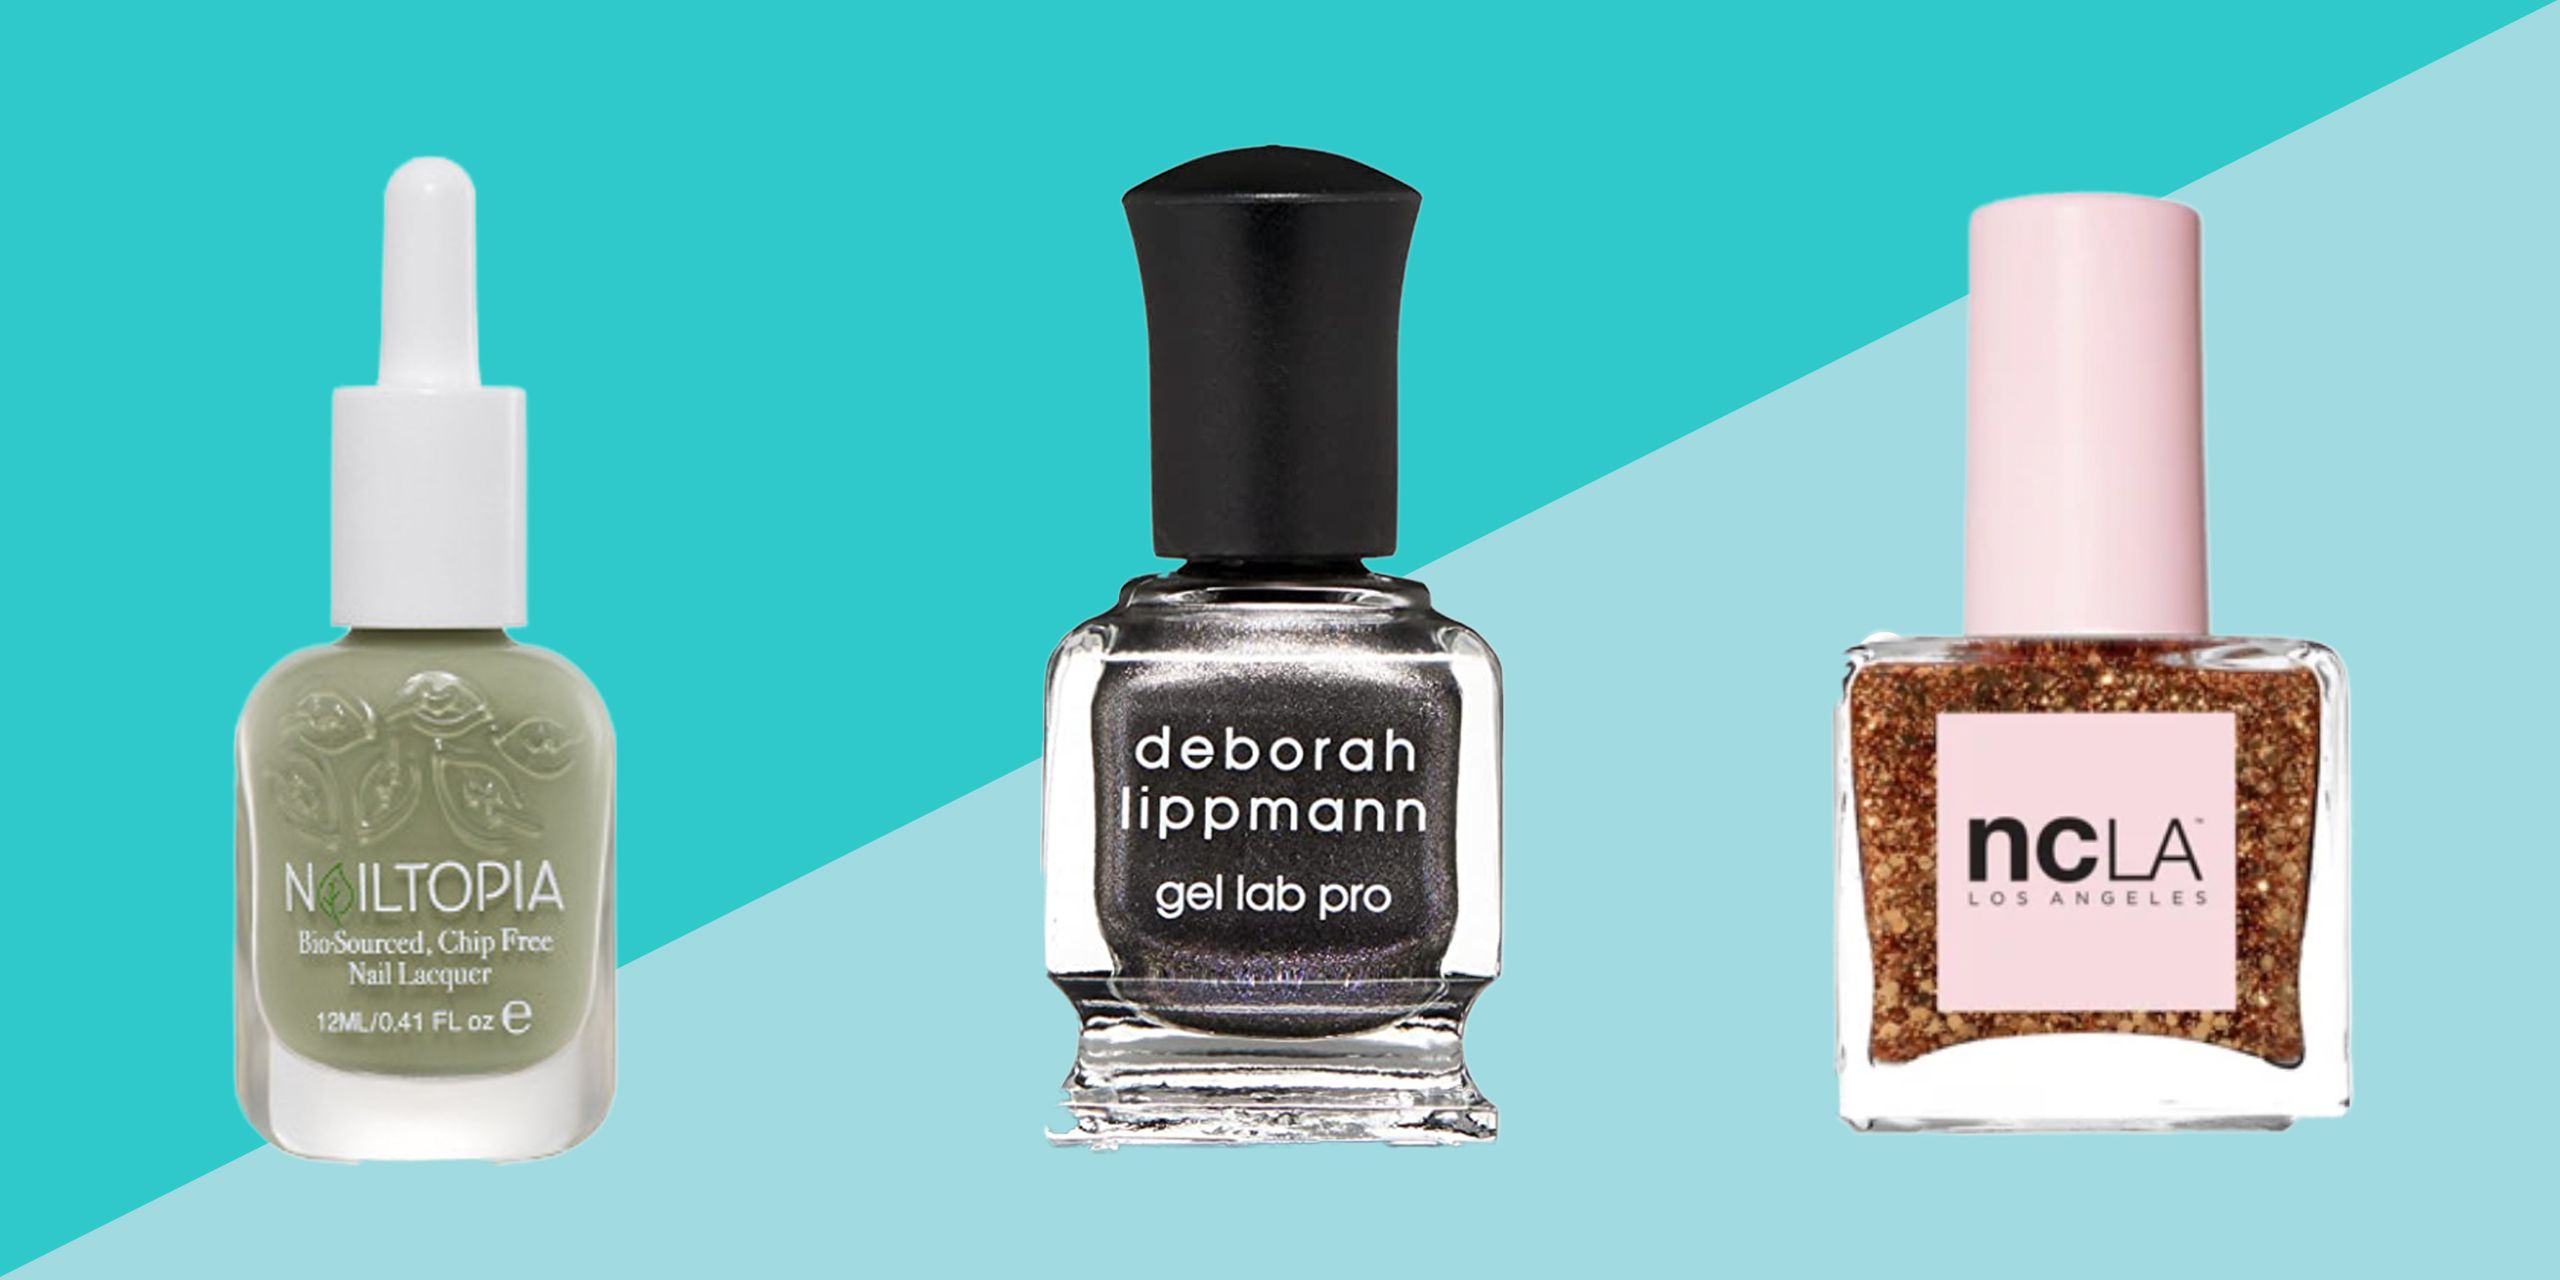 5. "The Perfect Nail Color for May: Expert Recommendations" - wide 4